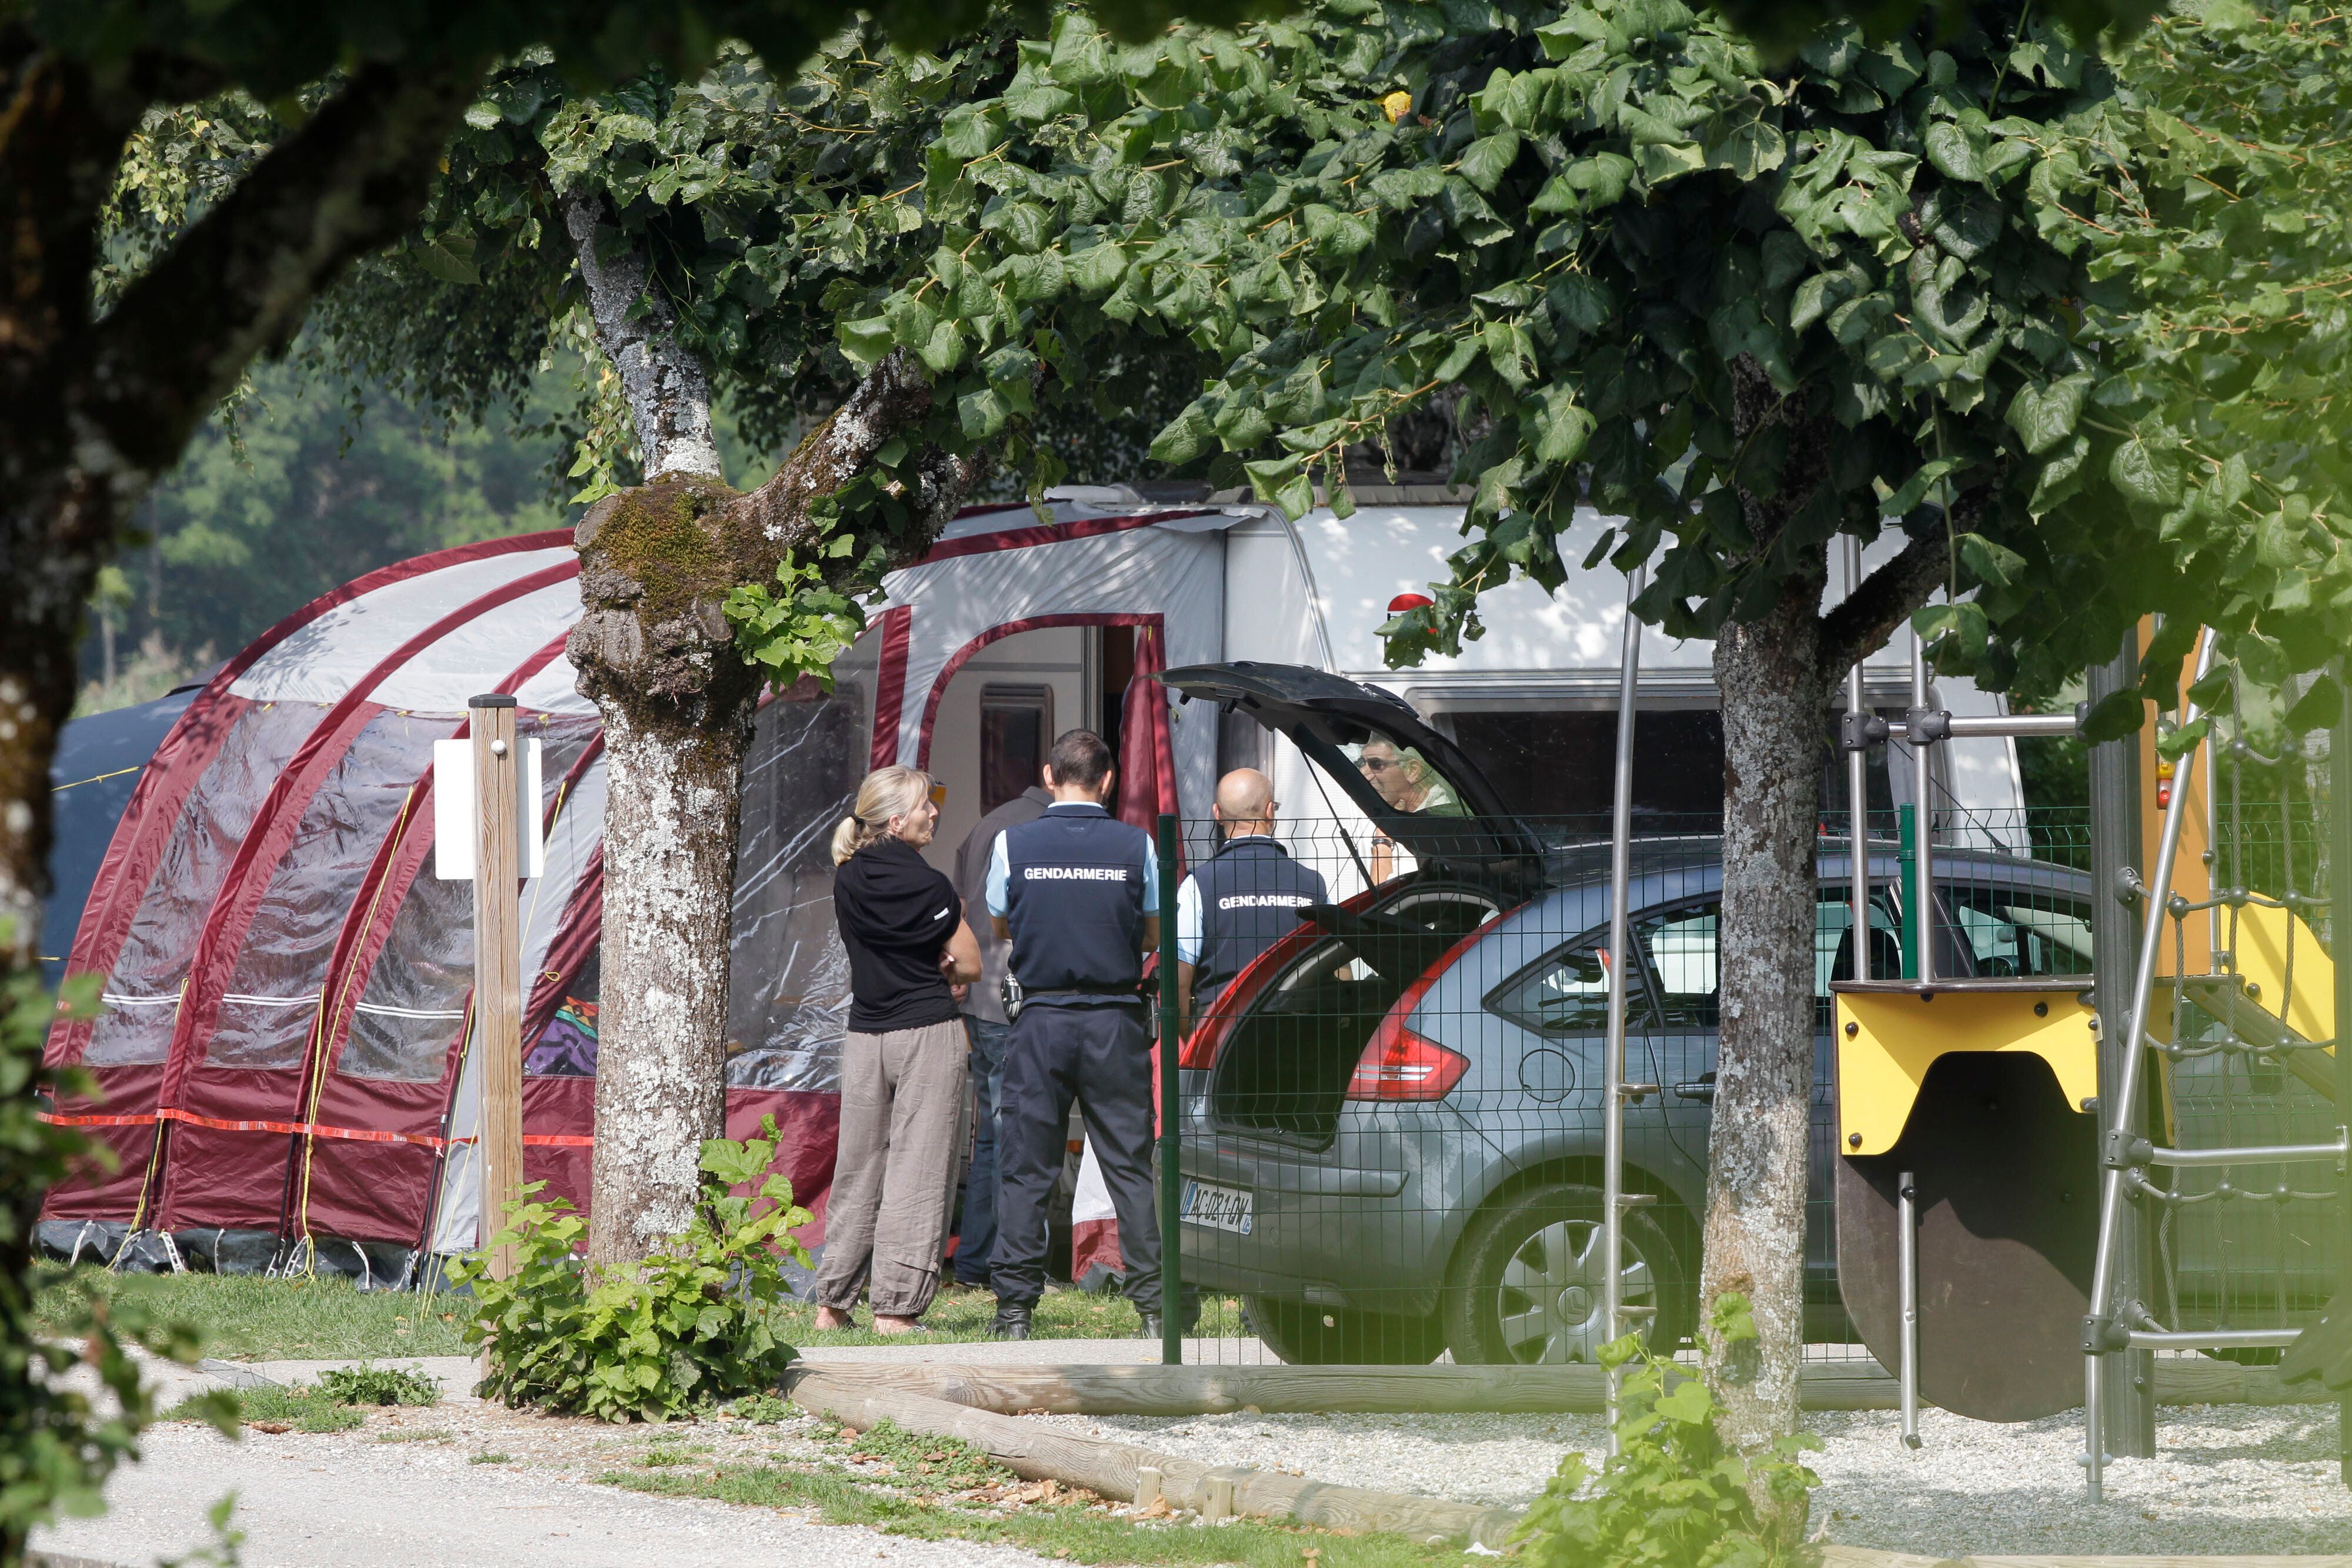 Gendarmes and investigators stand at the camp site where a slain British family were on vacation in Saint Jorioz, near Annecy, on Sept. 6, 2012. (AP Photo/Lionel Cironneau, File)